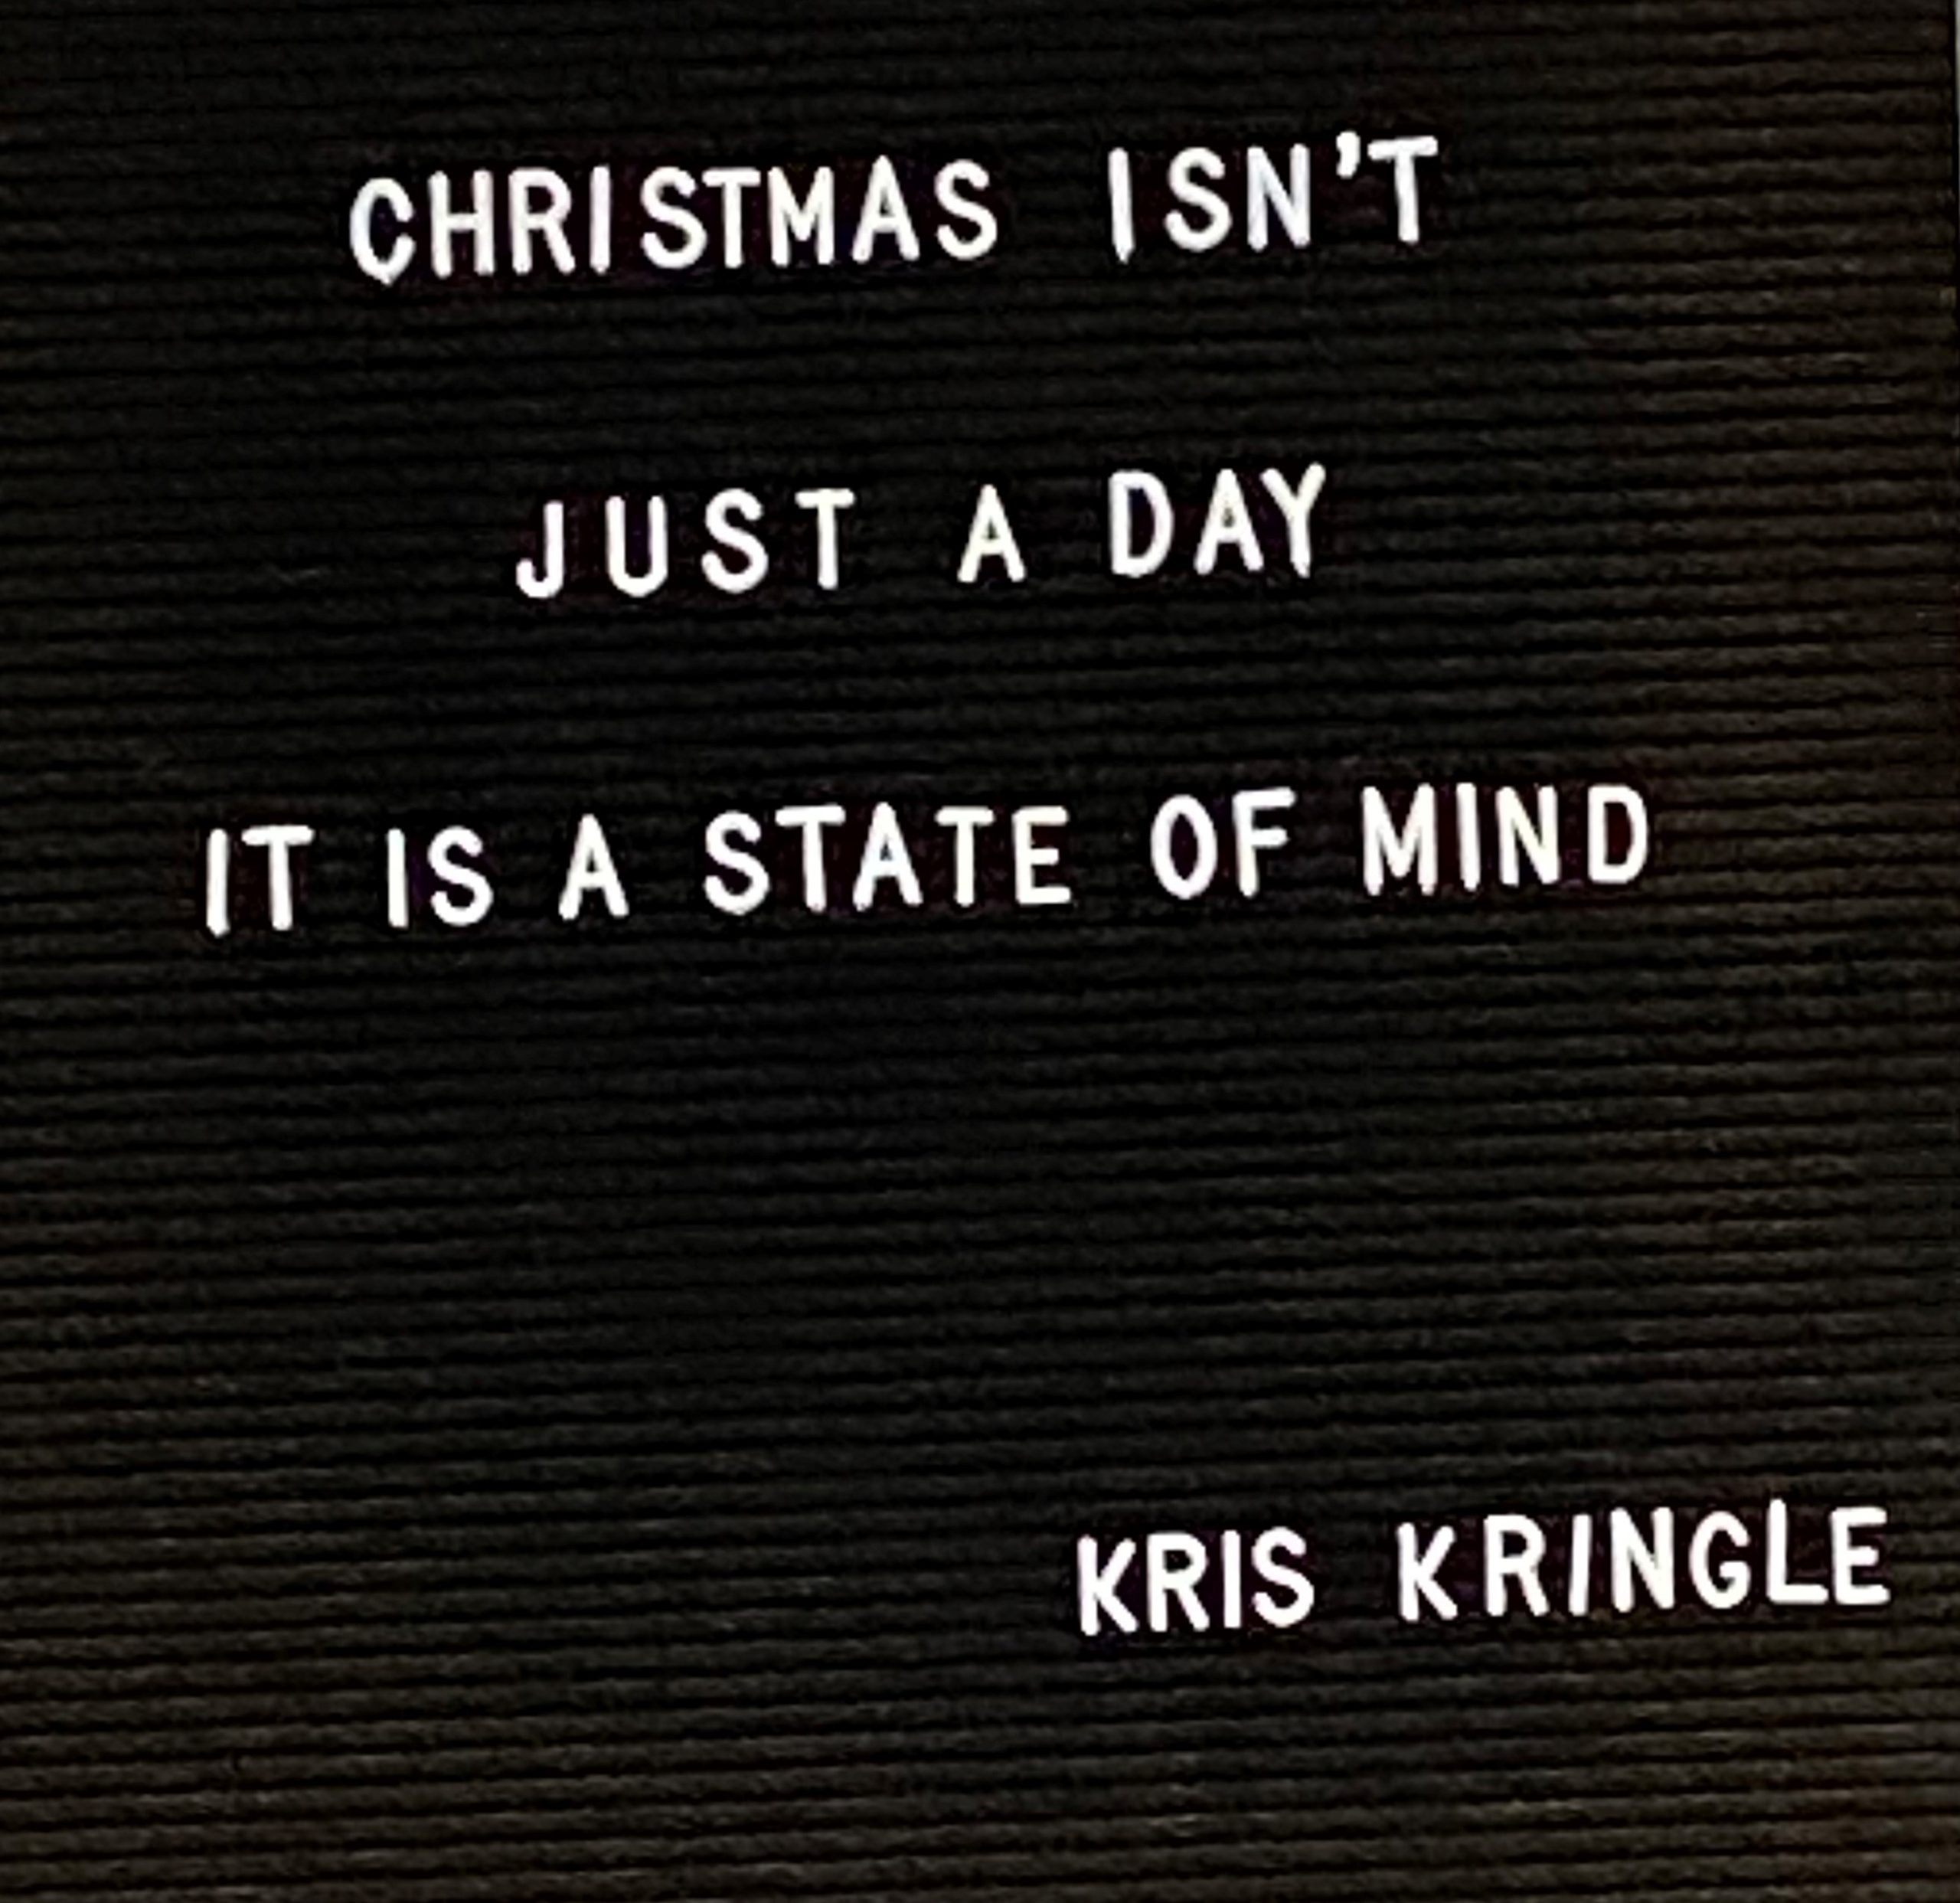 Kris Kringle Quote about Christmas